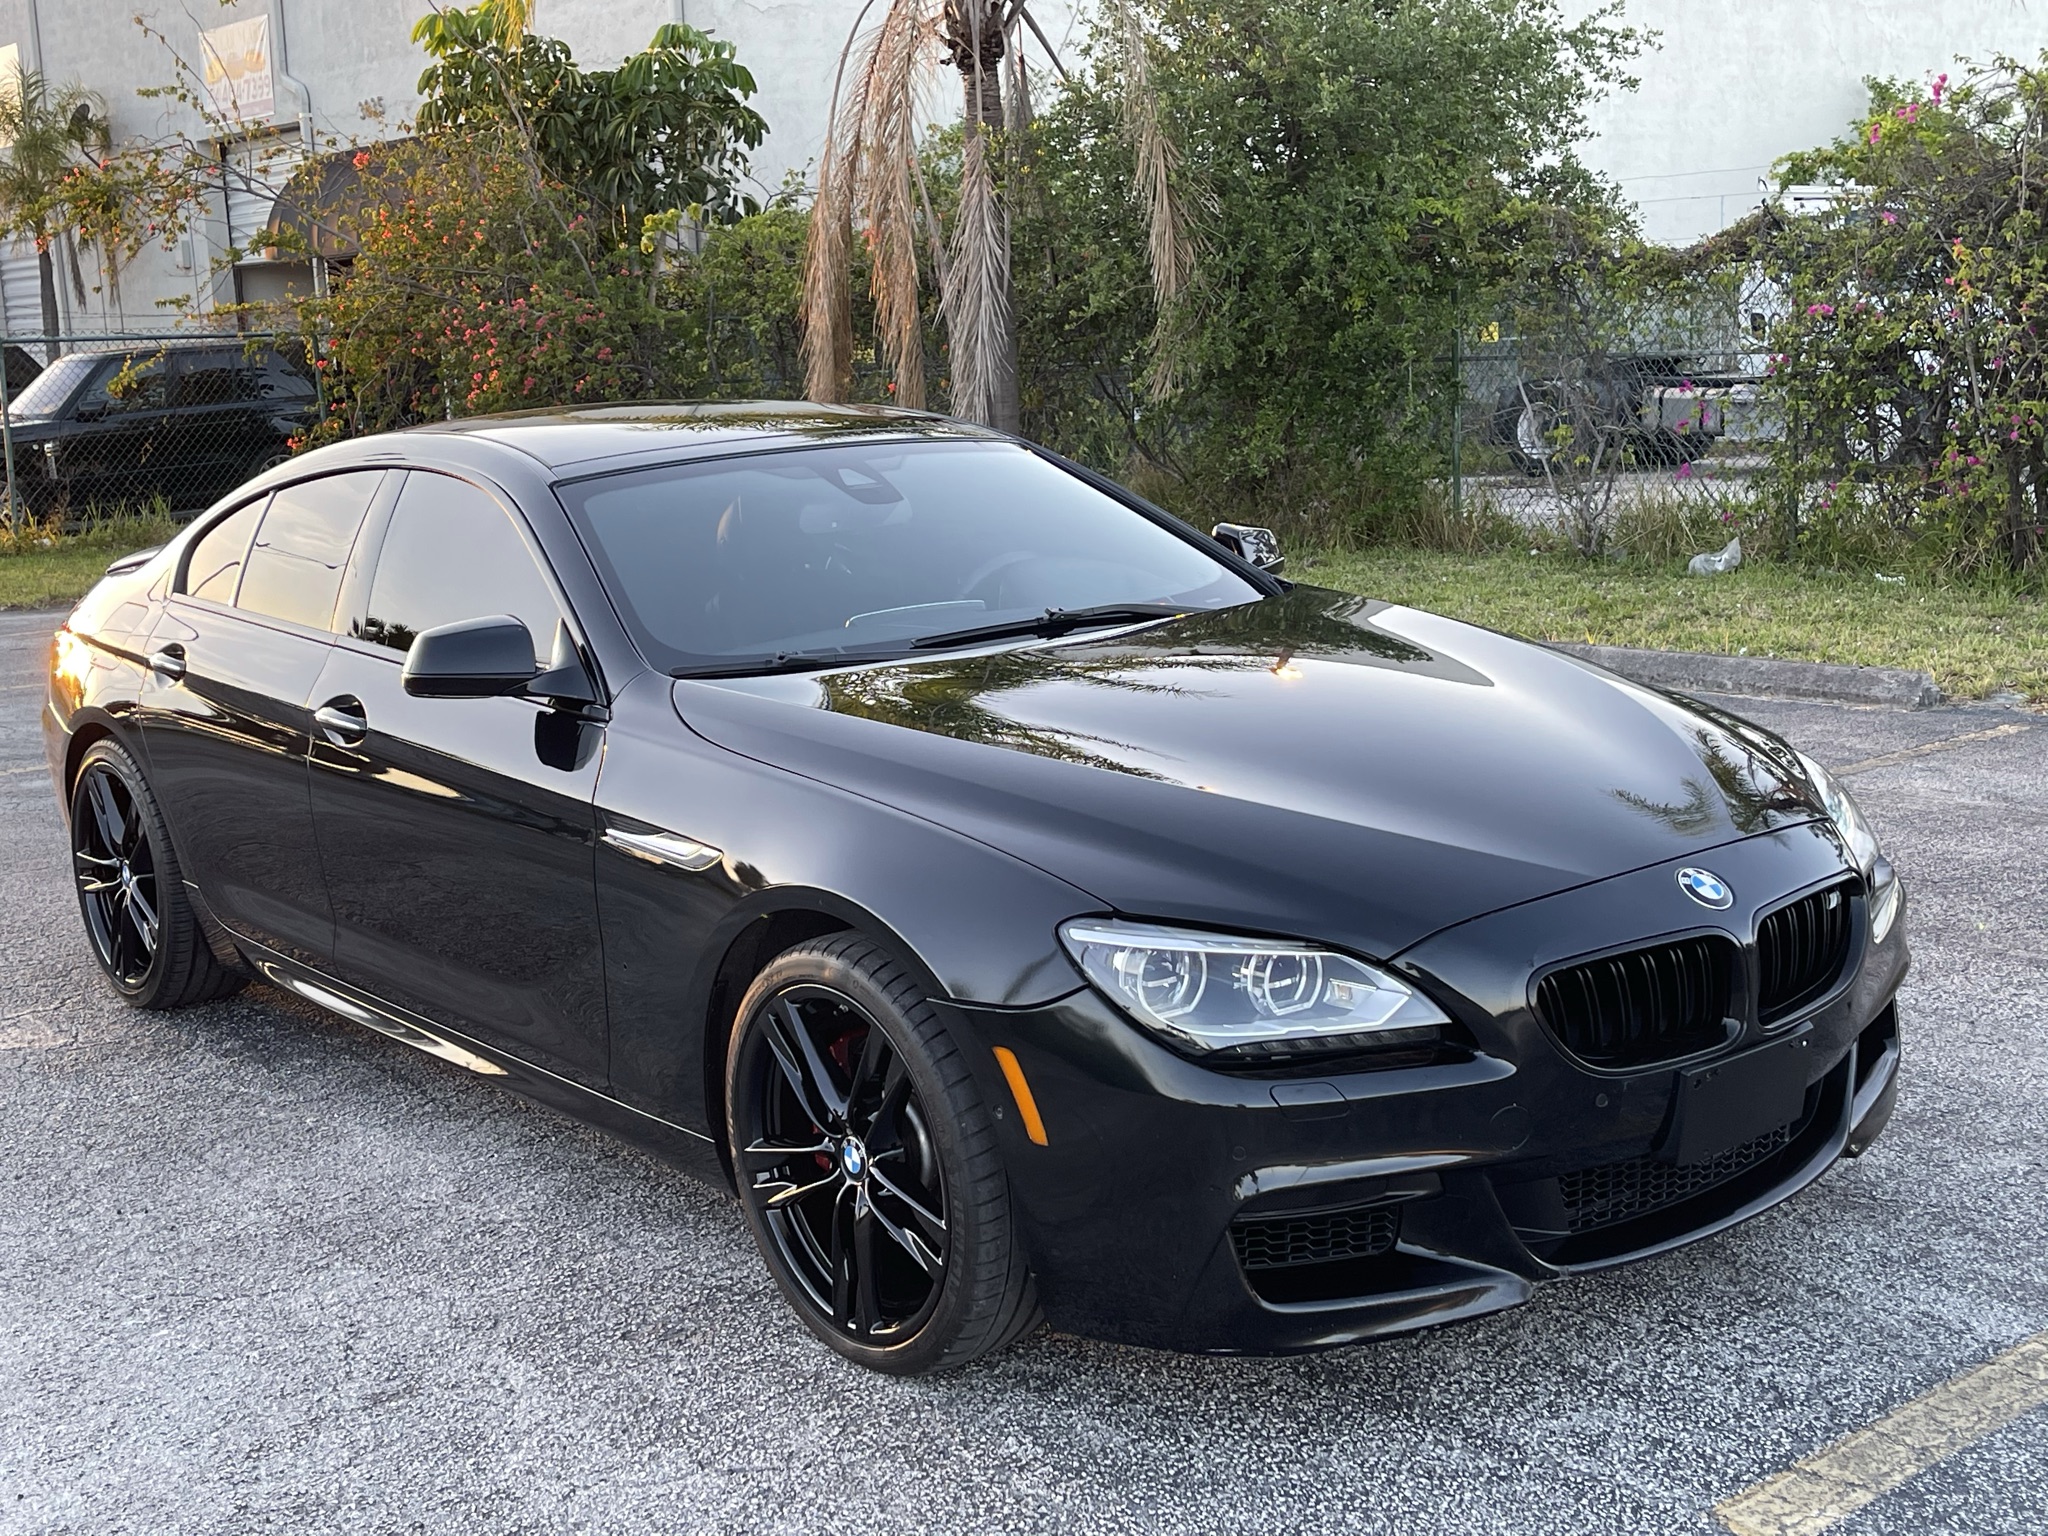 Buy Used 2014 BMW 650I M SPORT EDITION GRAN COUPE for $28 900 from trusted  dealer in Brooklyn, NY!